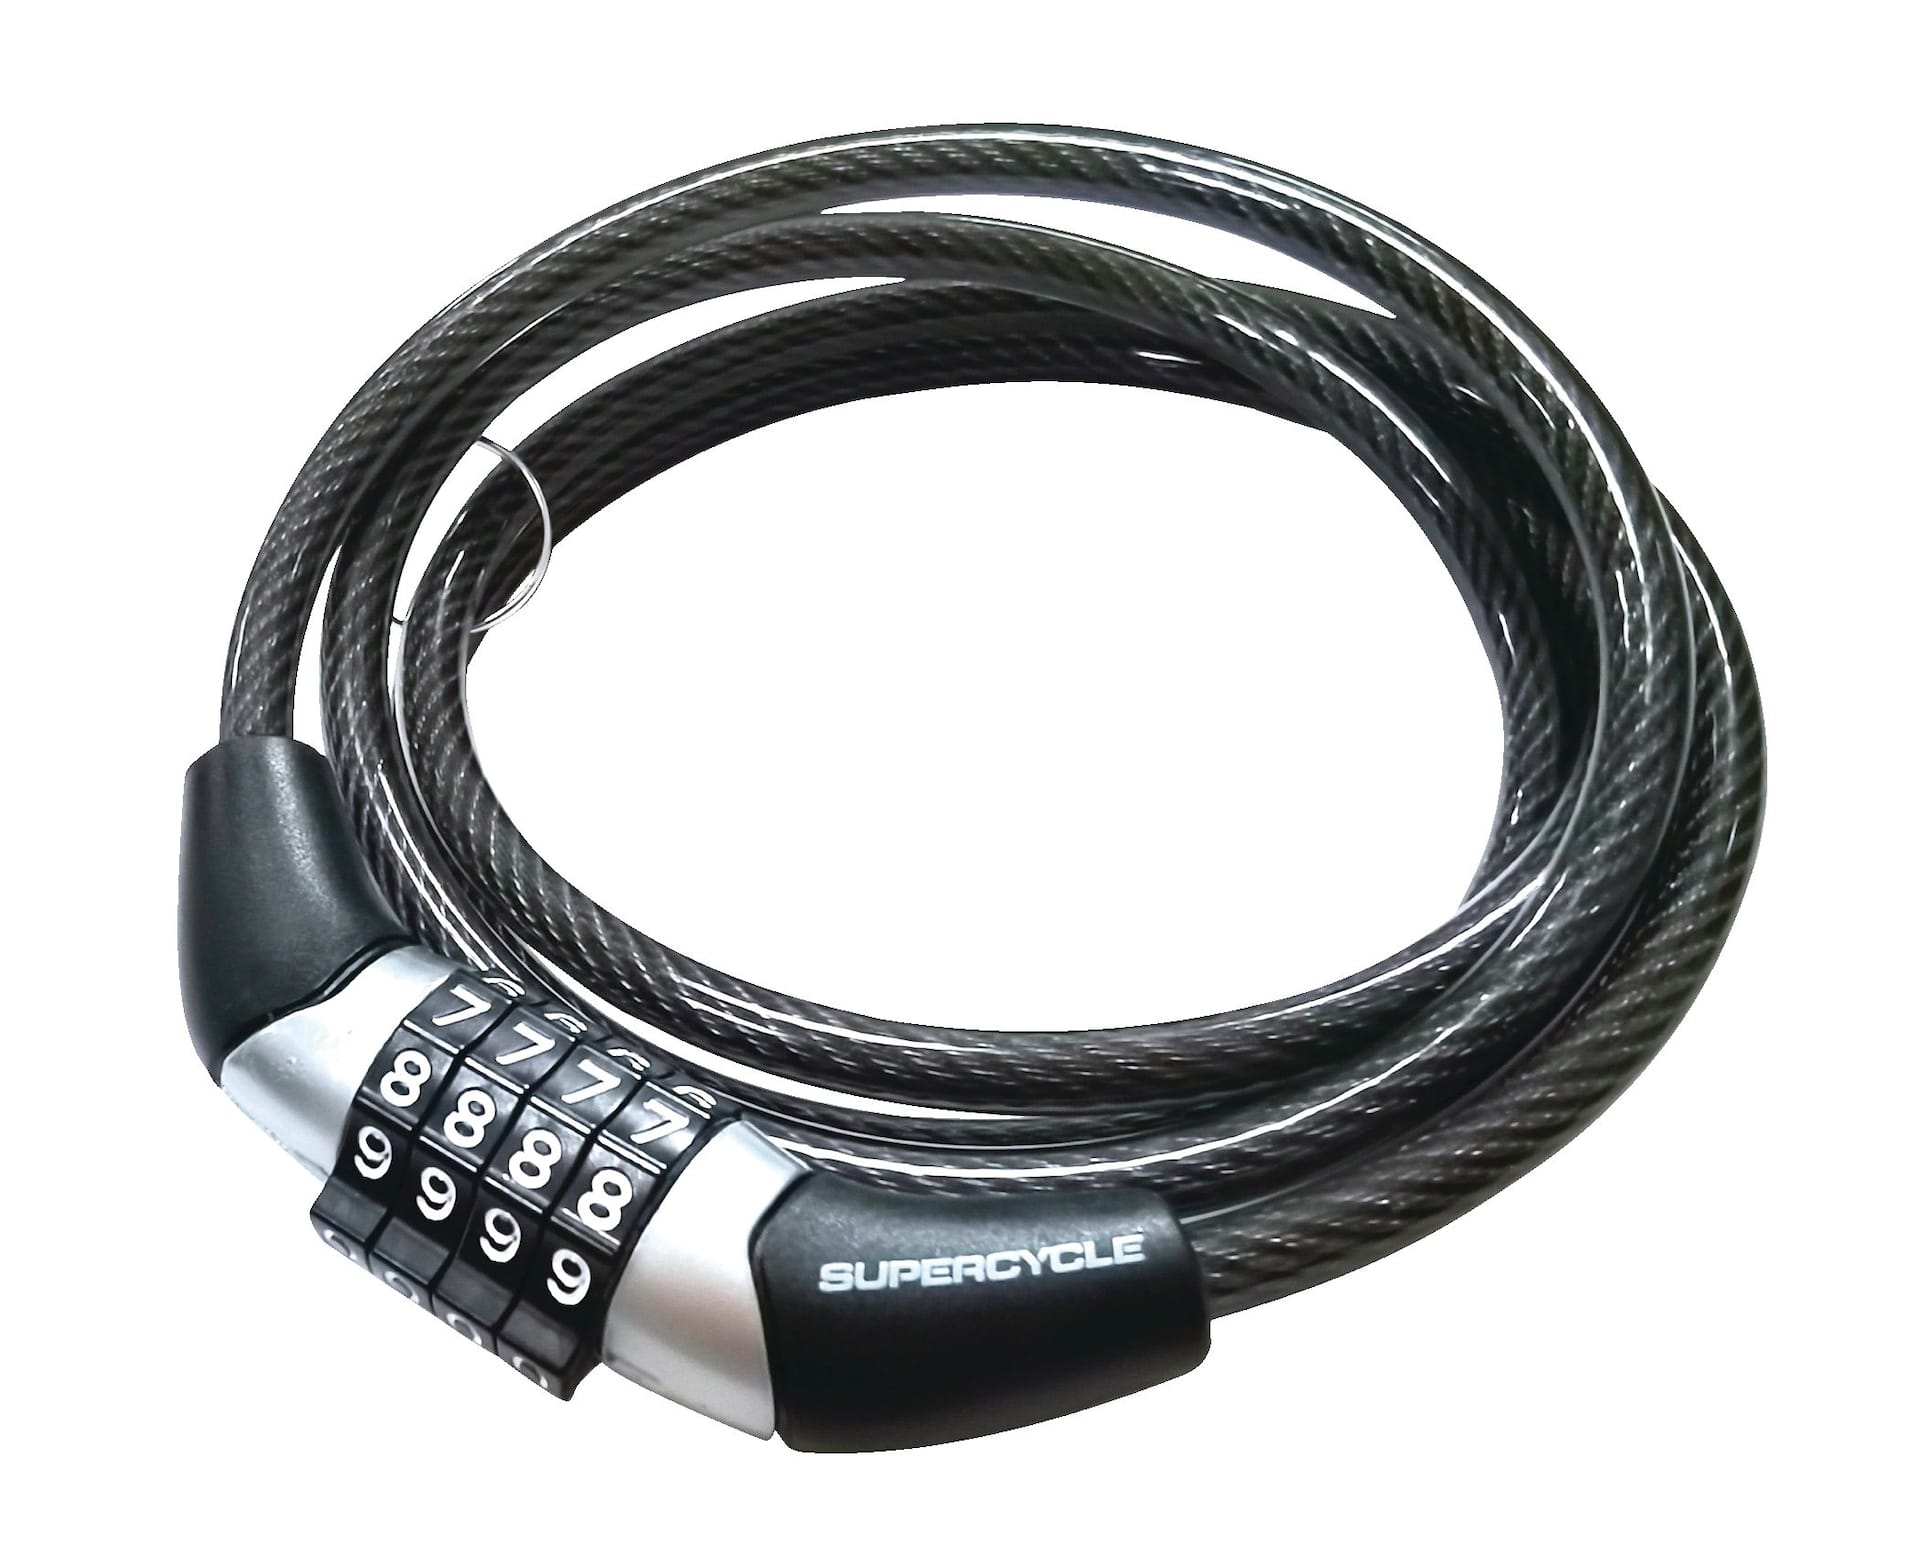 Supercycle Basic Bike Lock Cable w/4-Digit Dial Combination, Anti-Theft ...